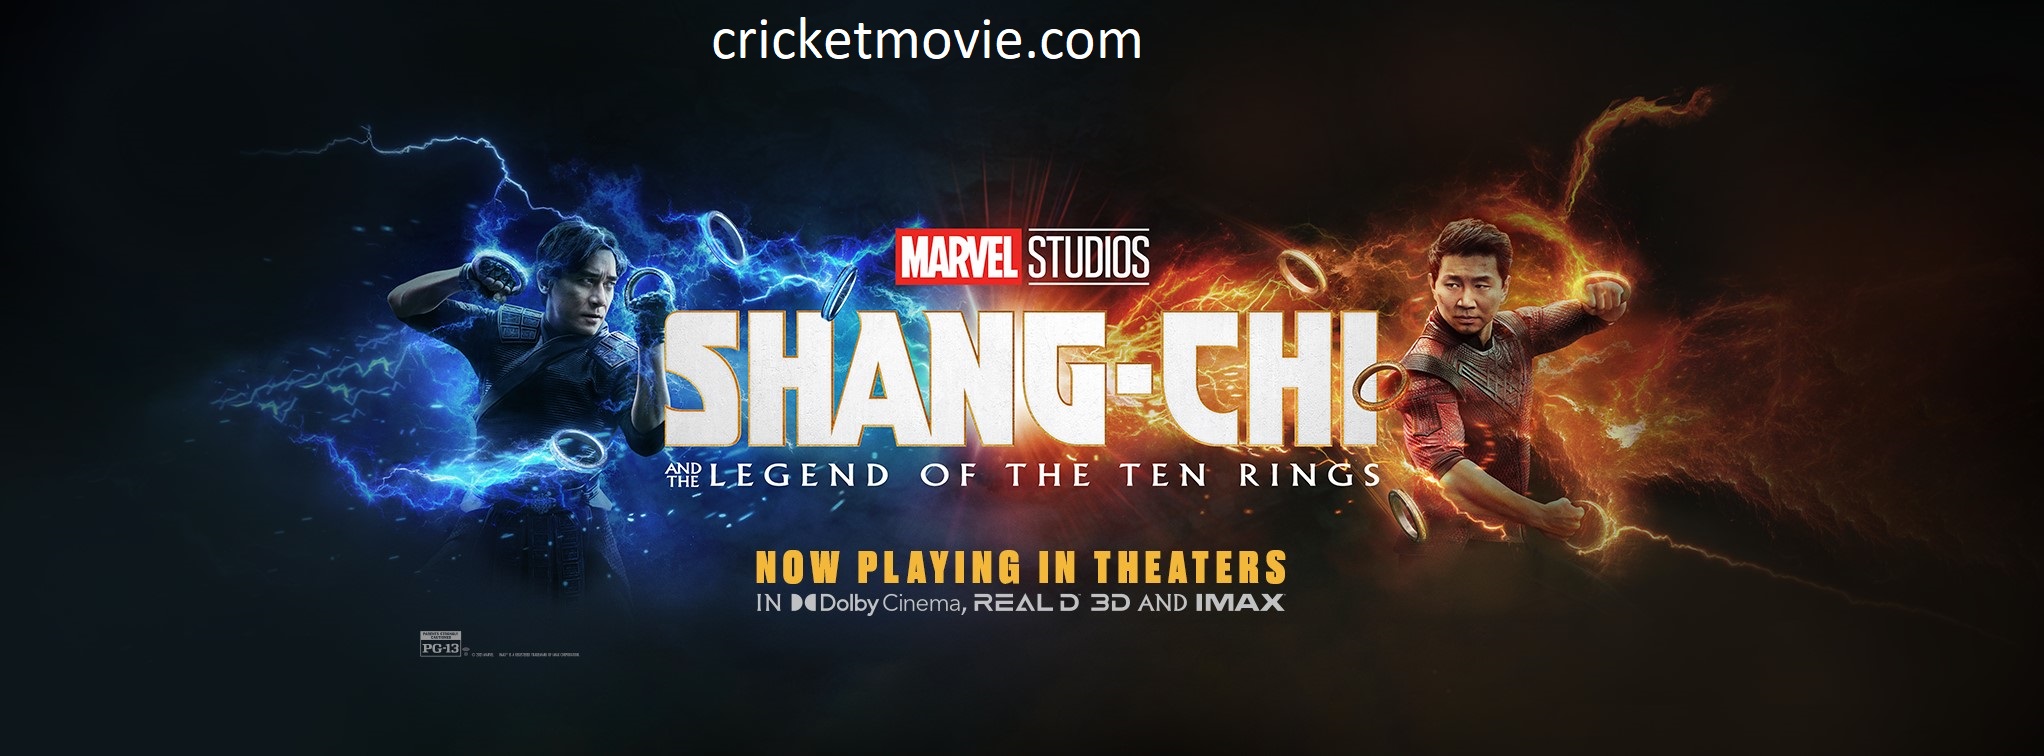 Shang-Chi and the Legend of the Ten Rings Review-cricketmovie.com